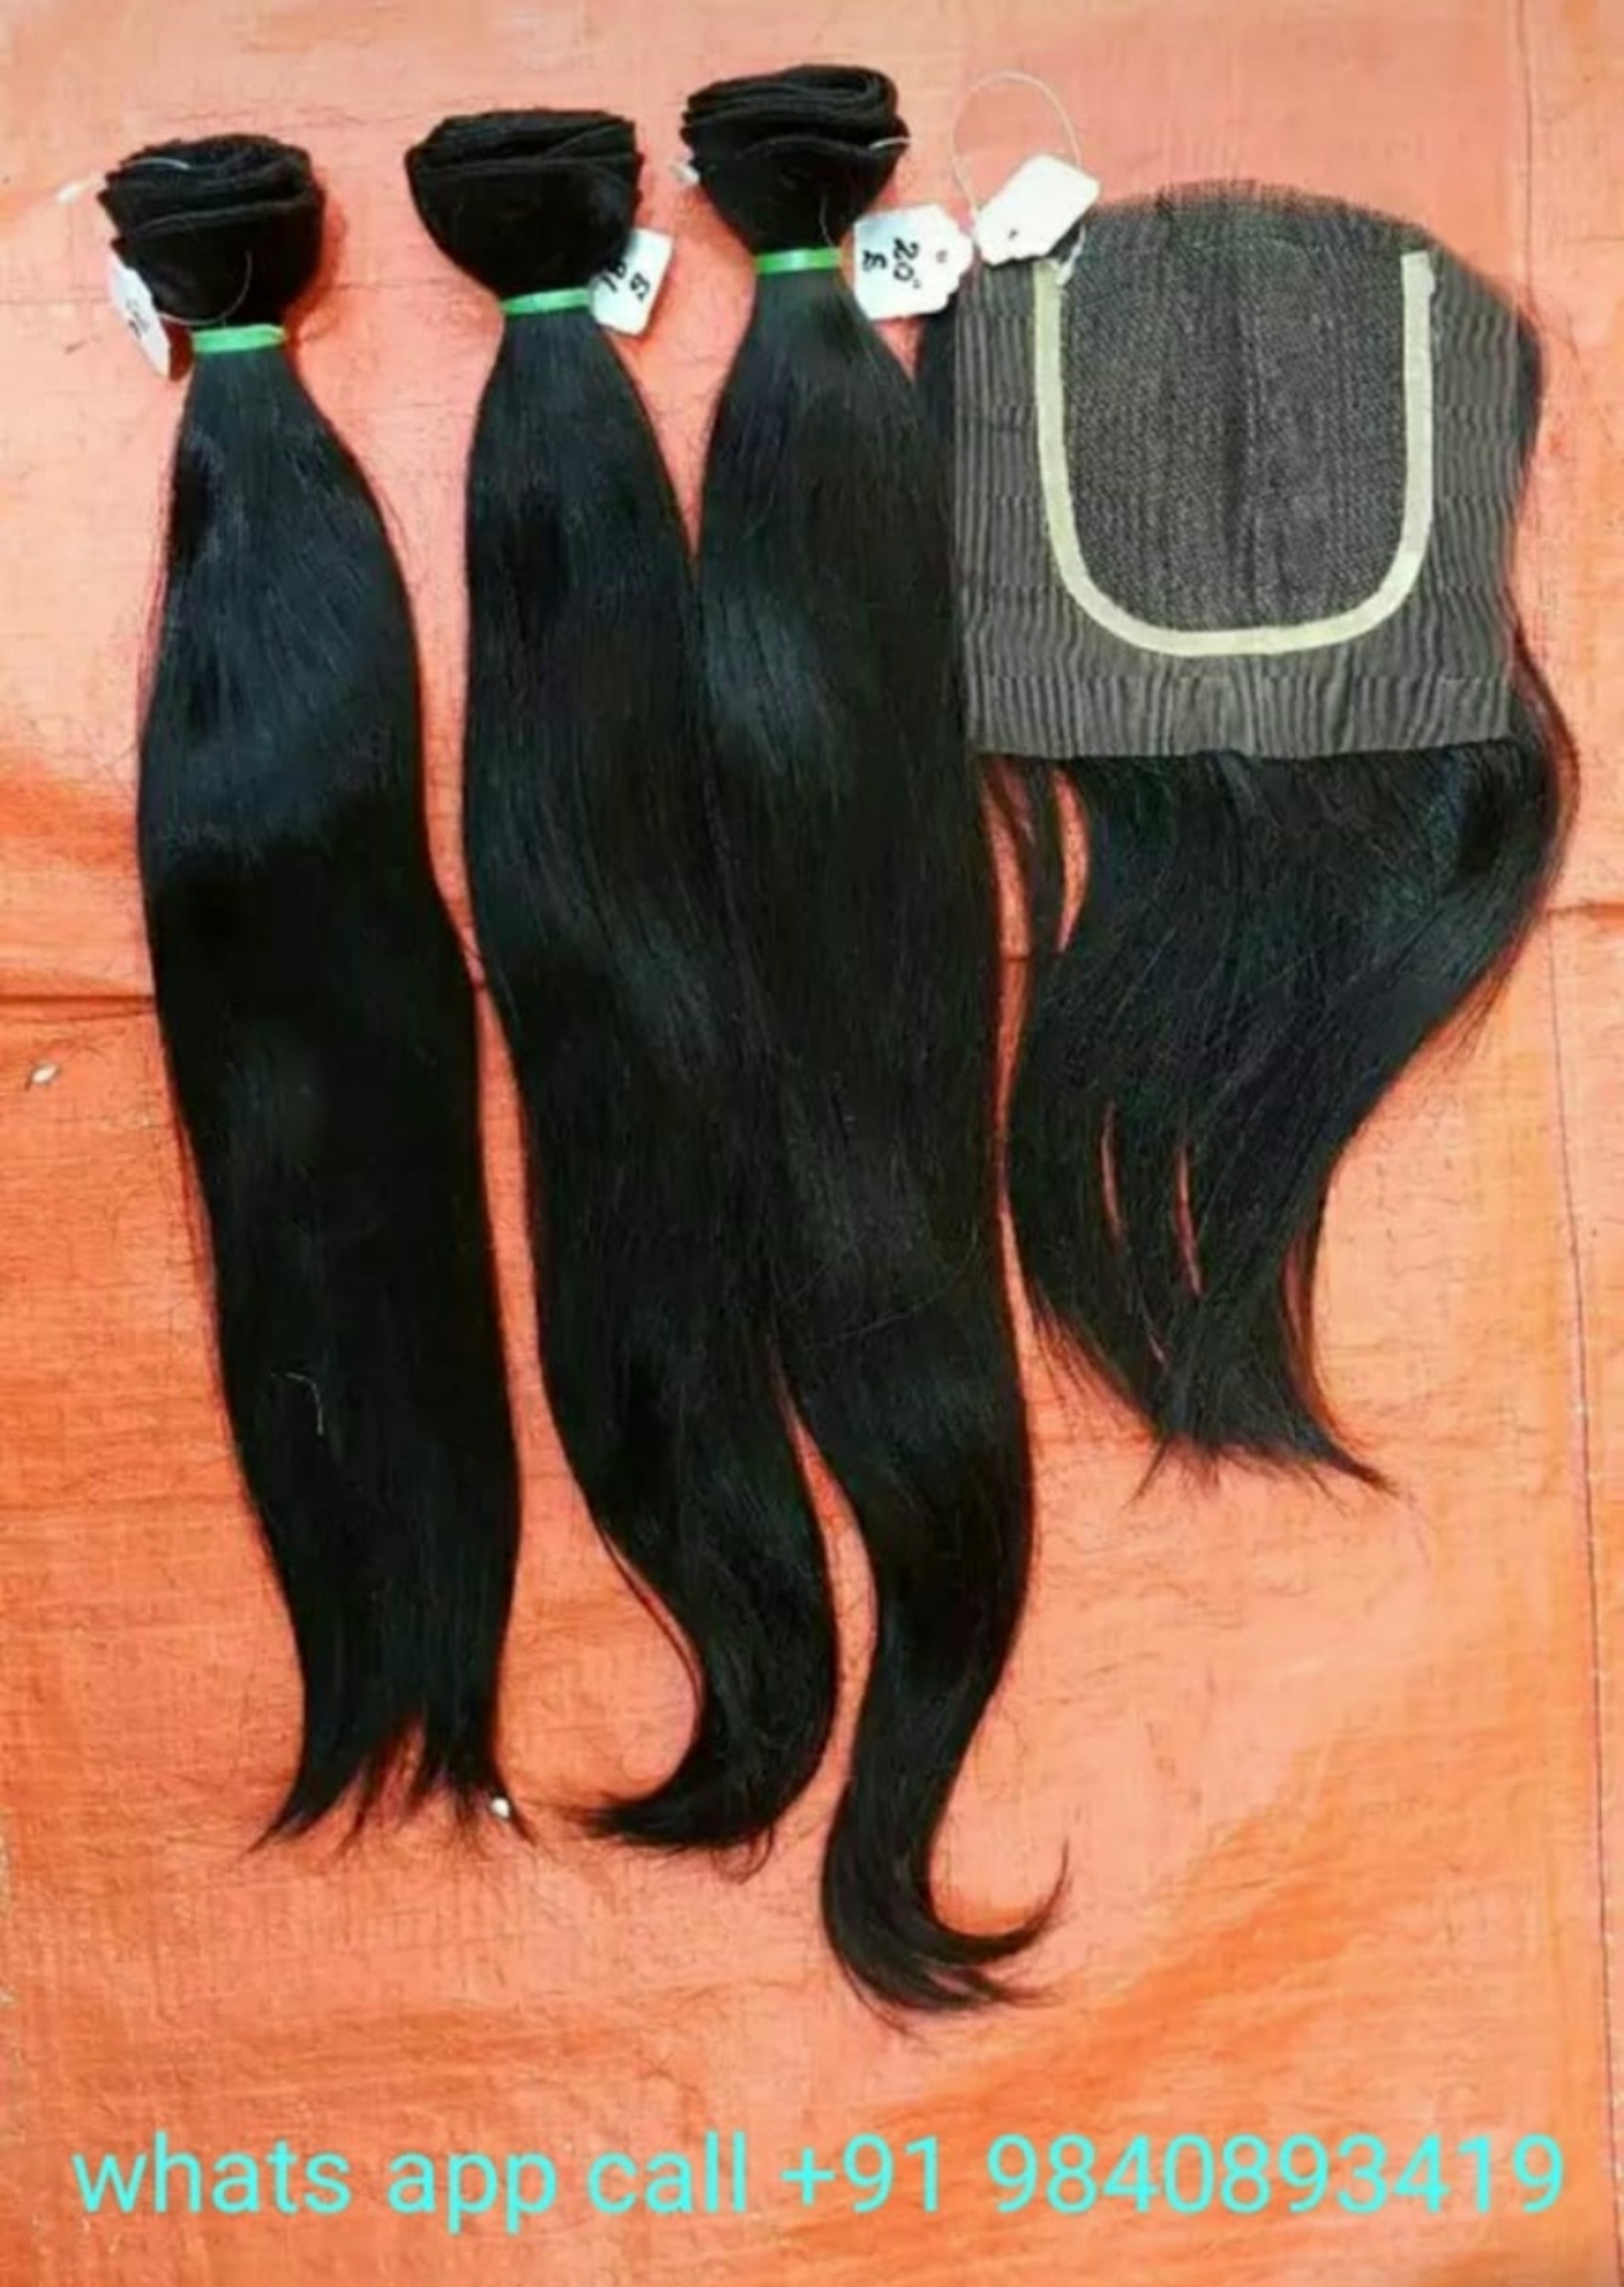 Hair Extensions Machine Wefts